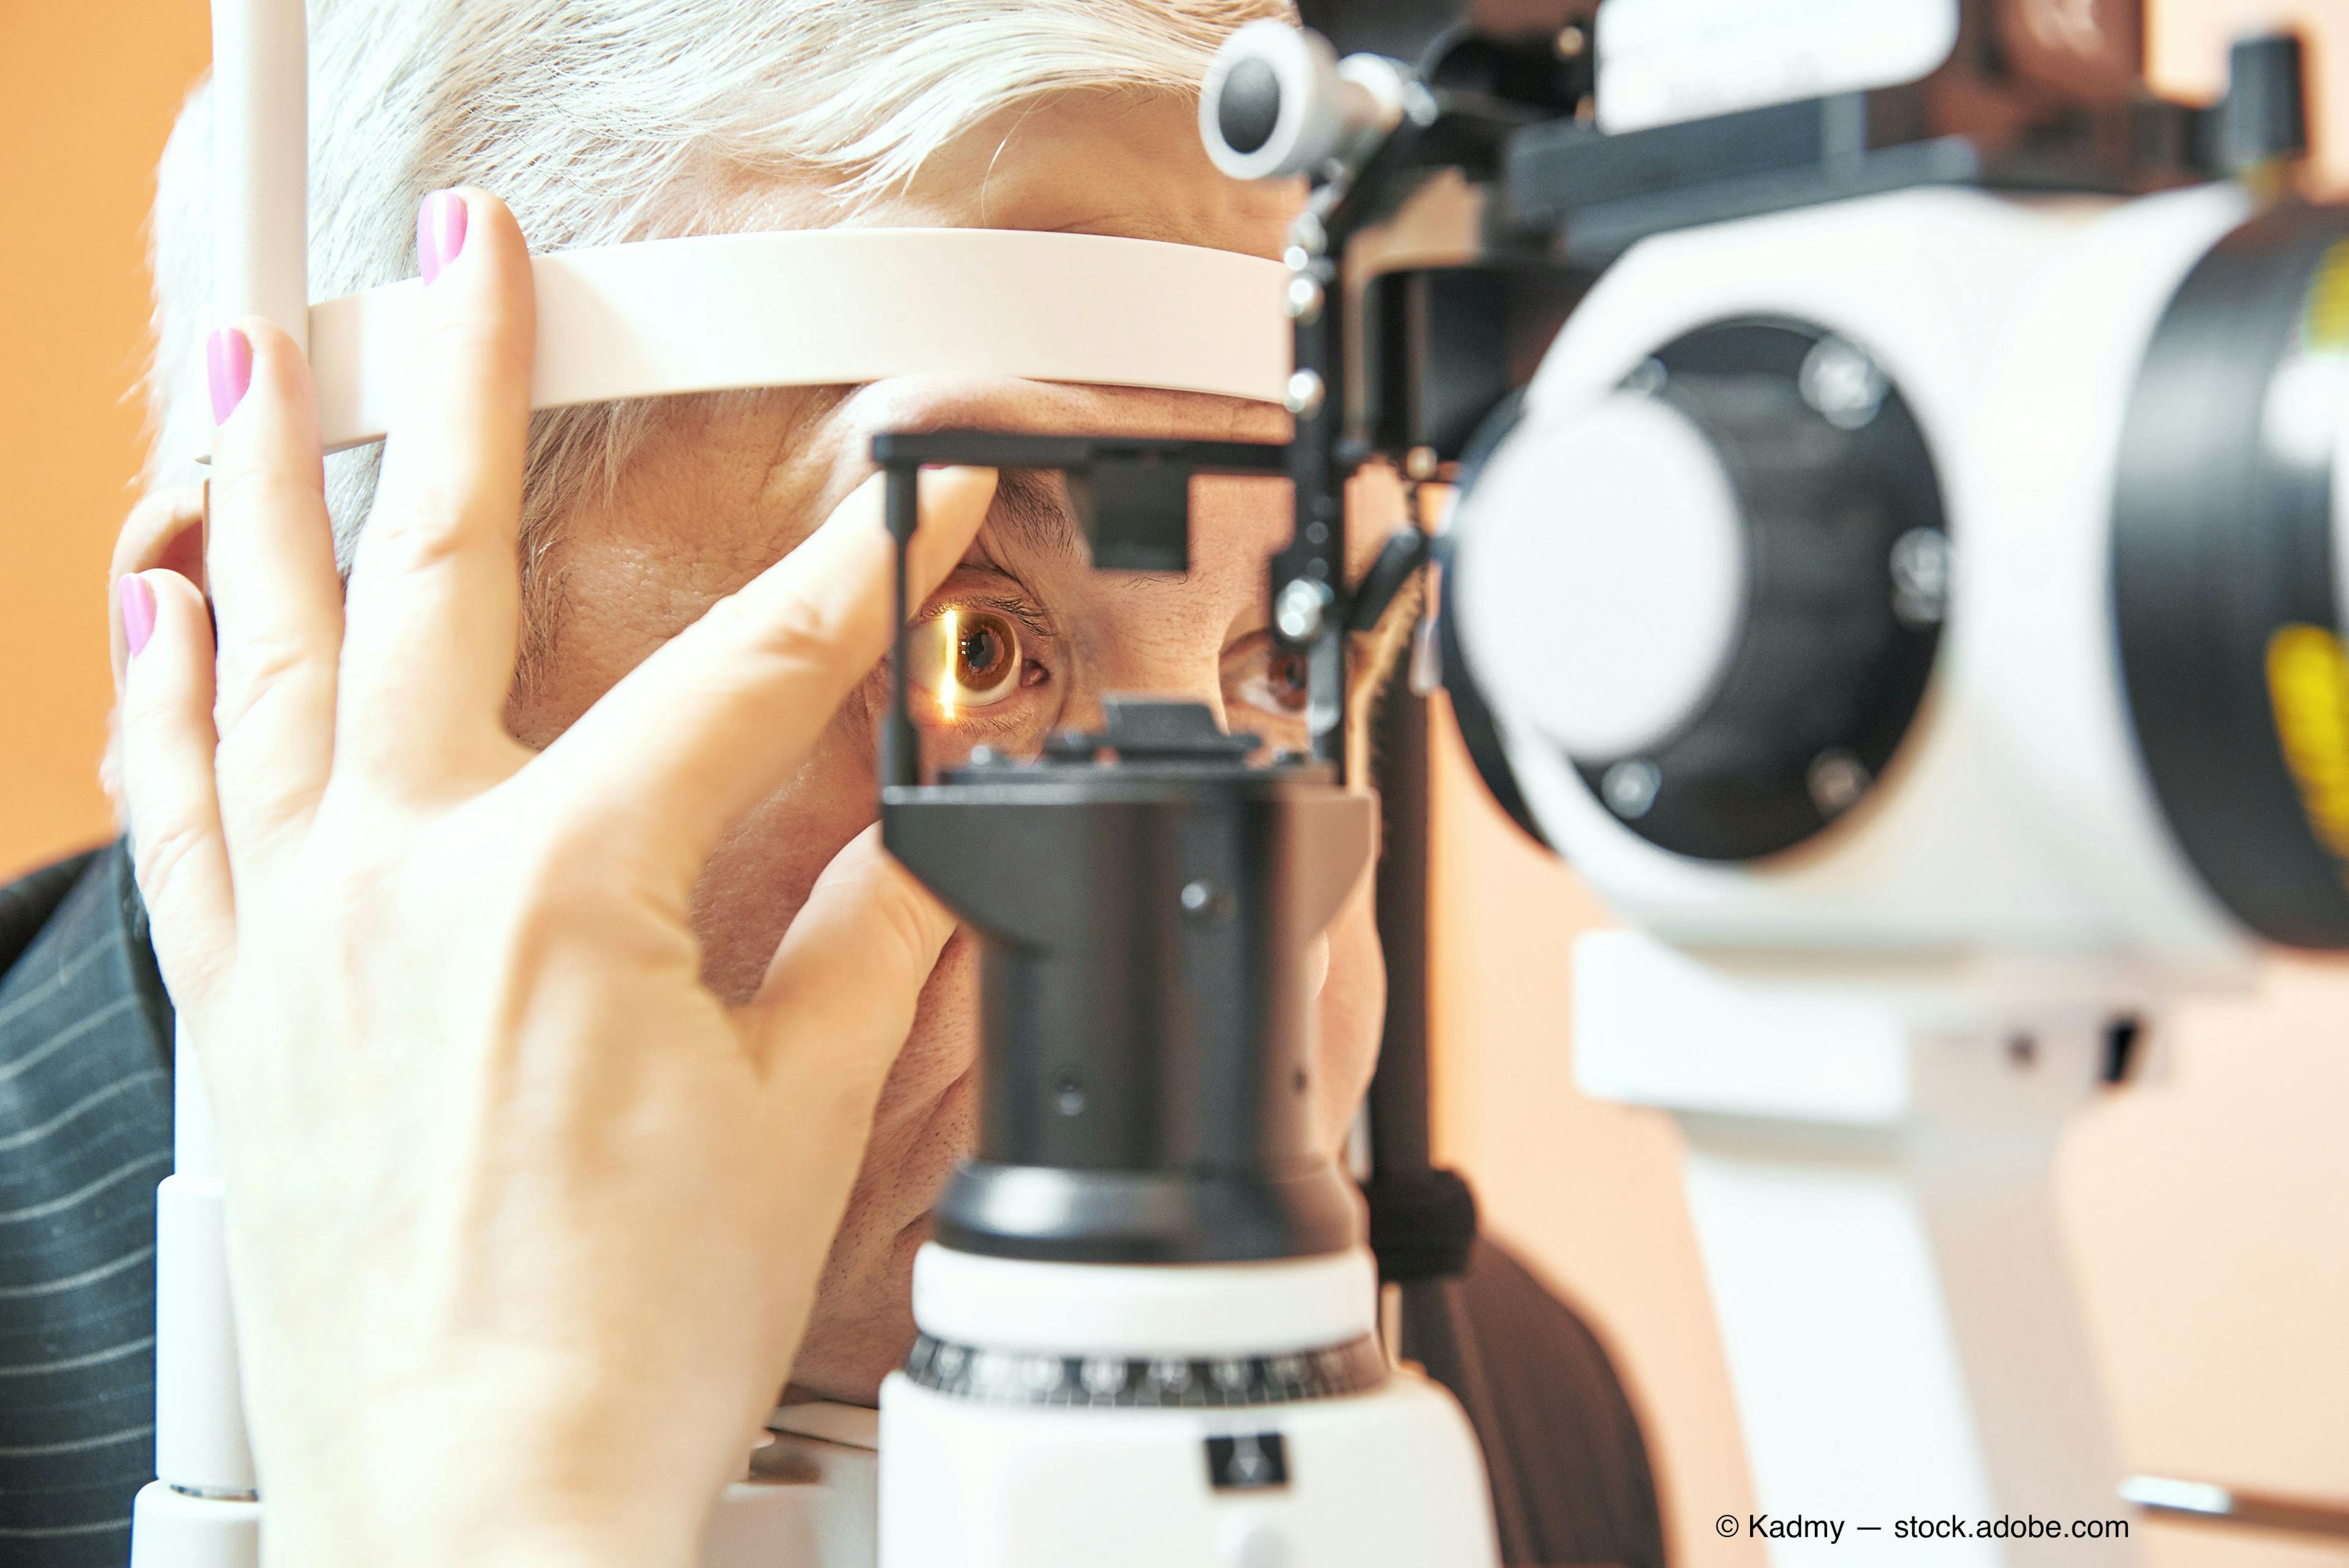 NCX 470, a novel NO-donating bimatoprost eye drop, is currently in Phase 3 clinical development for the lowering of IOP in patients with open-angle glaucoma or ocular hypertension.(Image courtesy of Adobe Stock)